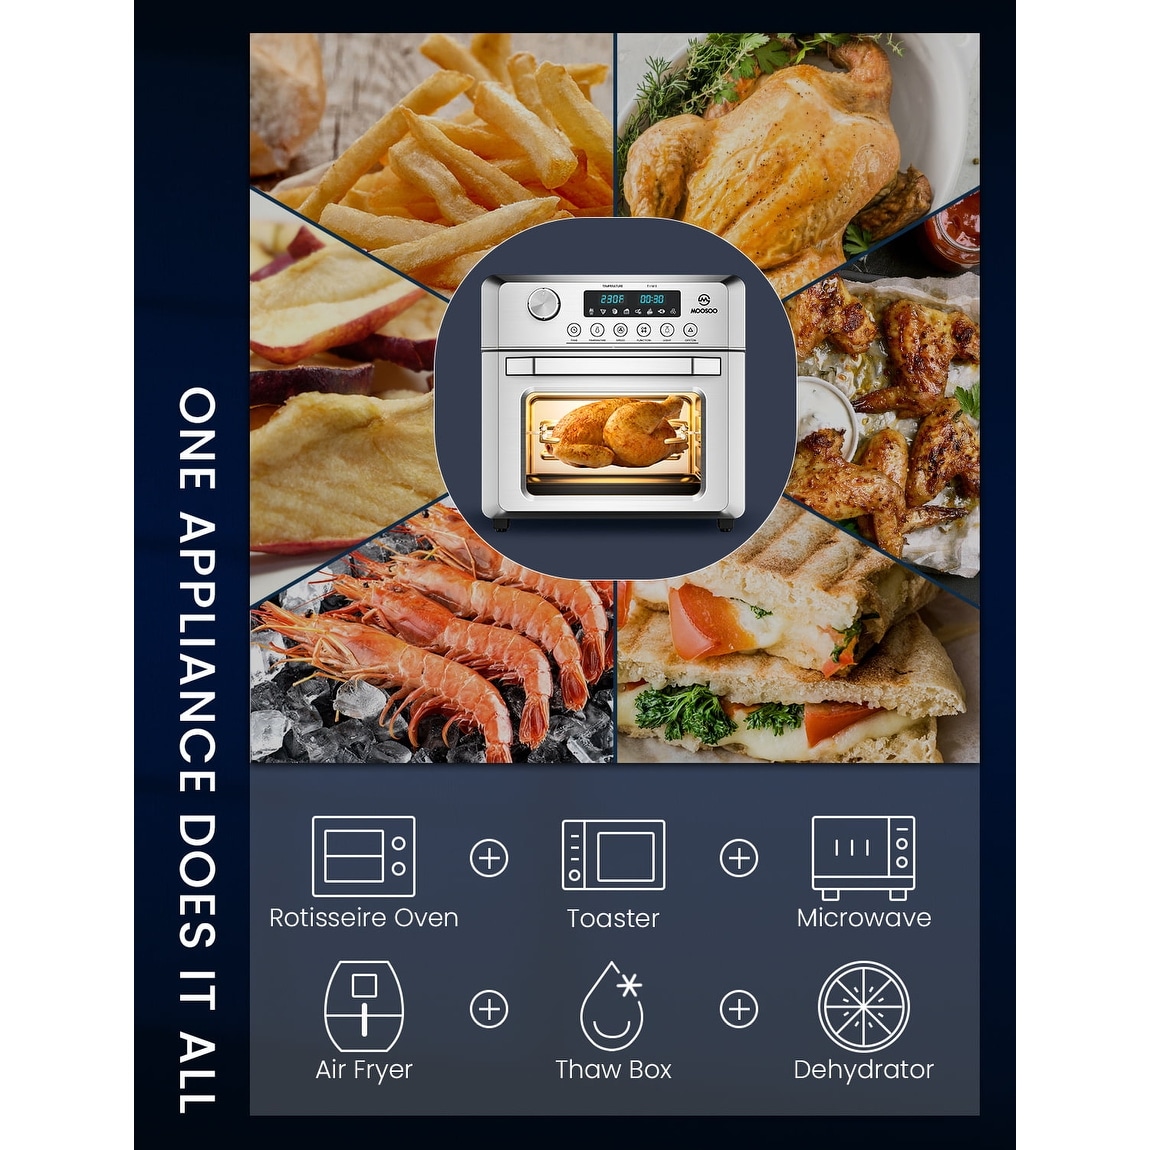 Moosoo Air Fryer Oven with Digital Touchscreen, 8 Preset Modes